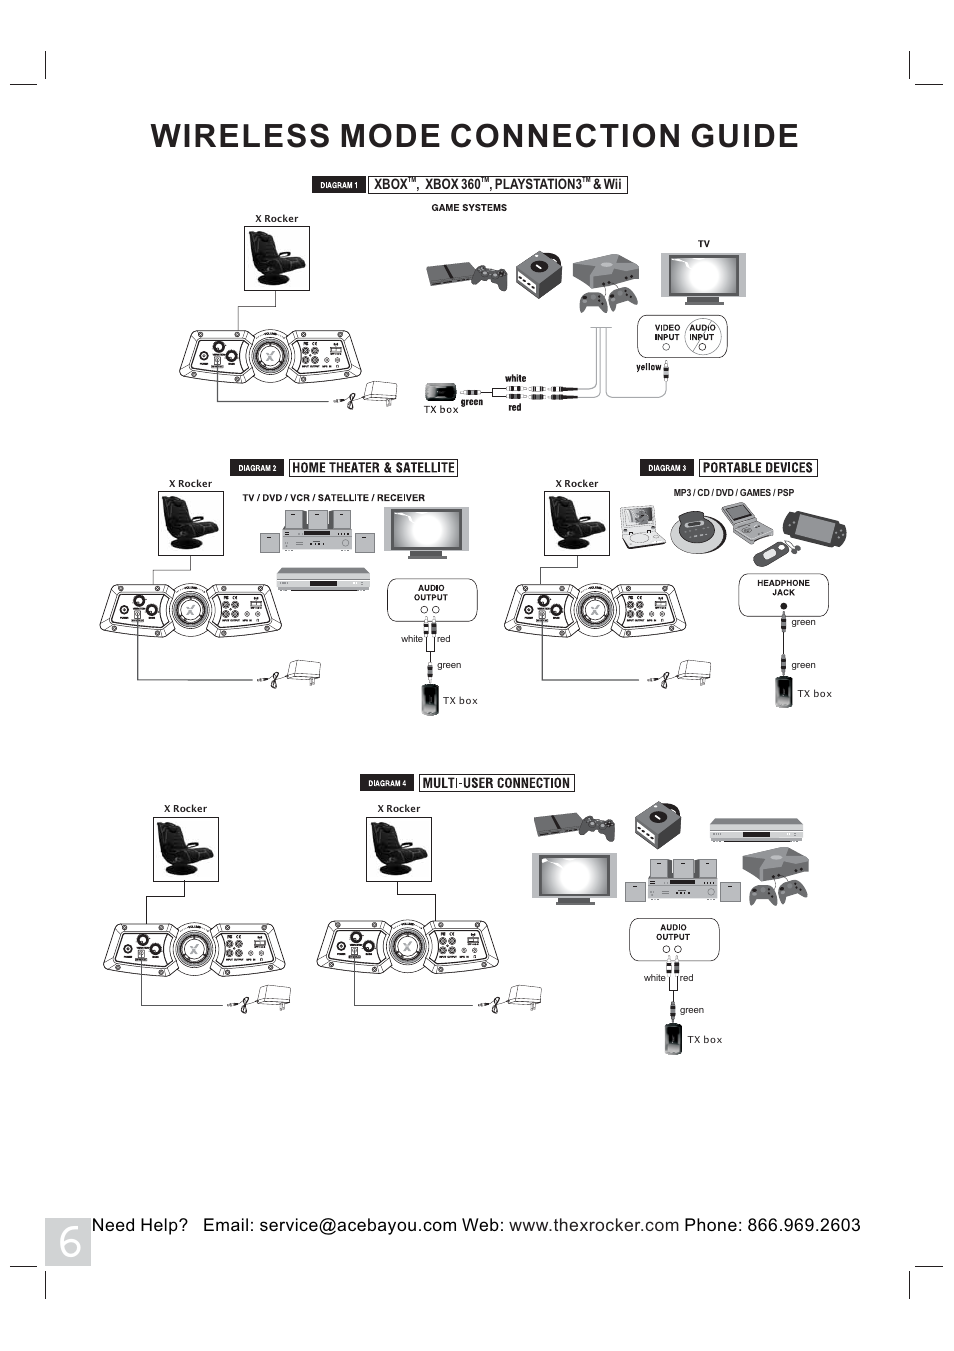 Wireless mode connection guide | X Rockers 51492 User Manual | Page 6 / 8